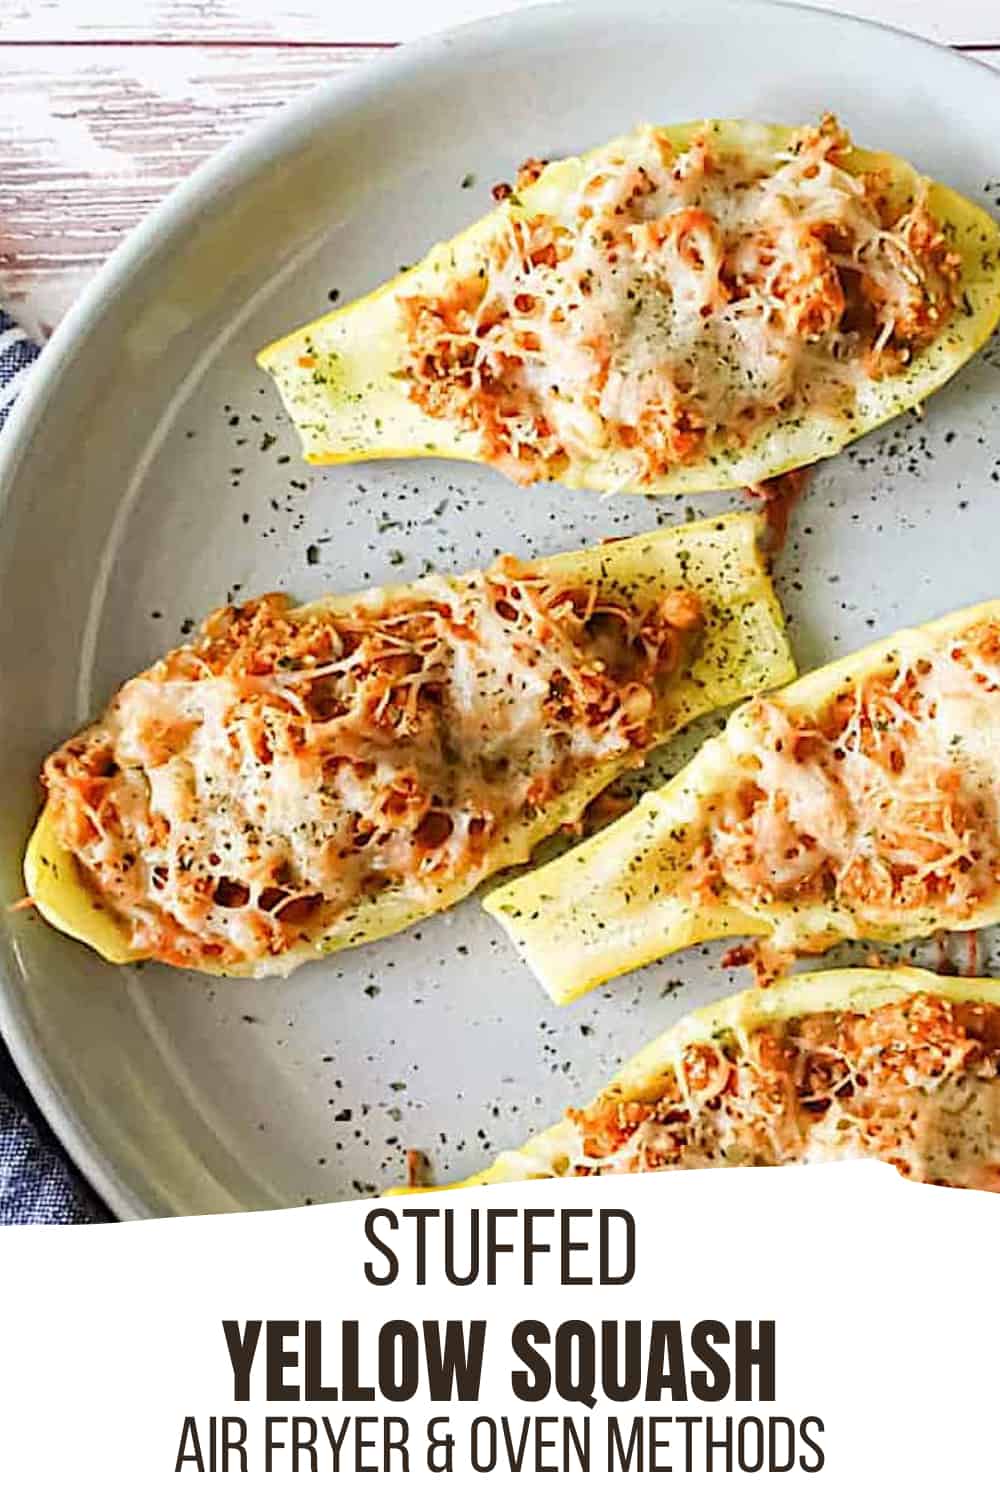 Stuffed Yellow Squash (Air Fryer and Oven Methods) - Tasty Oven